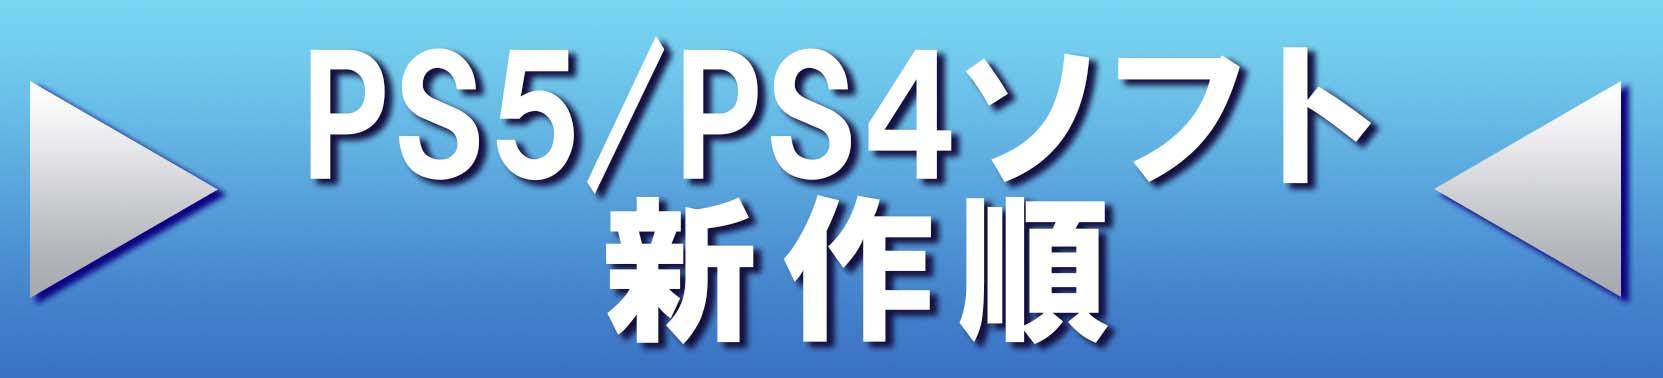 PS5/PS4新着順